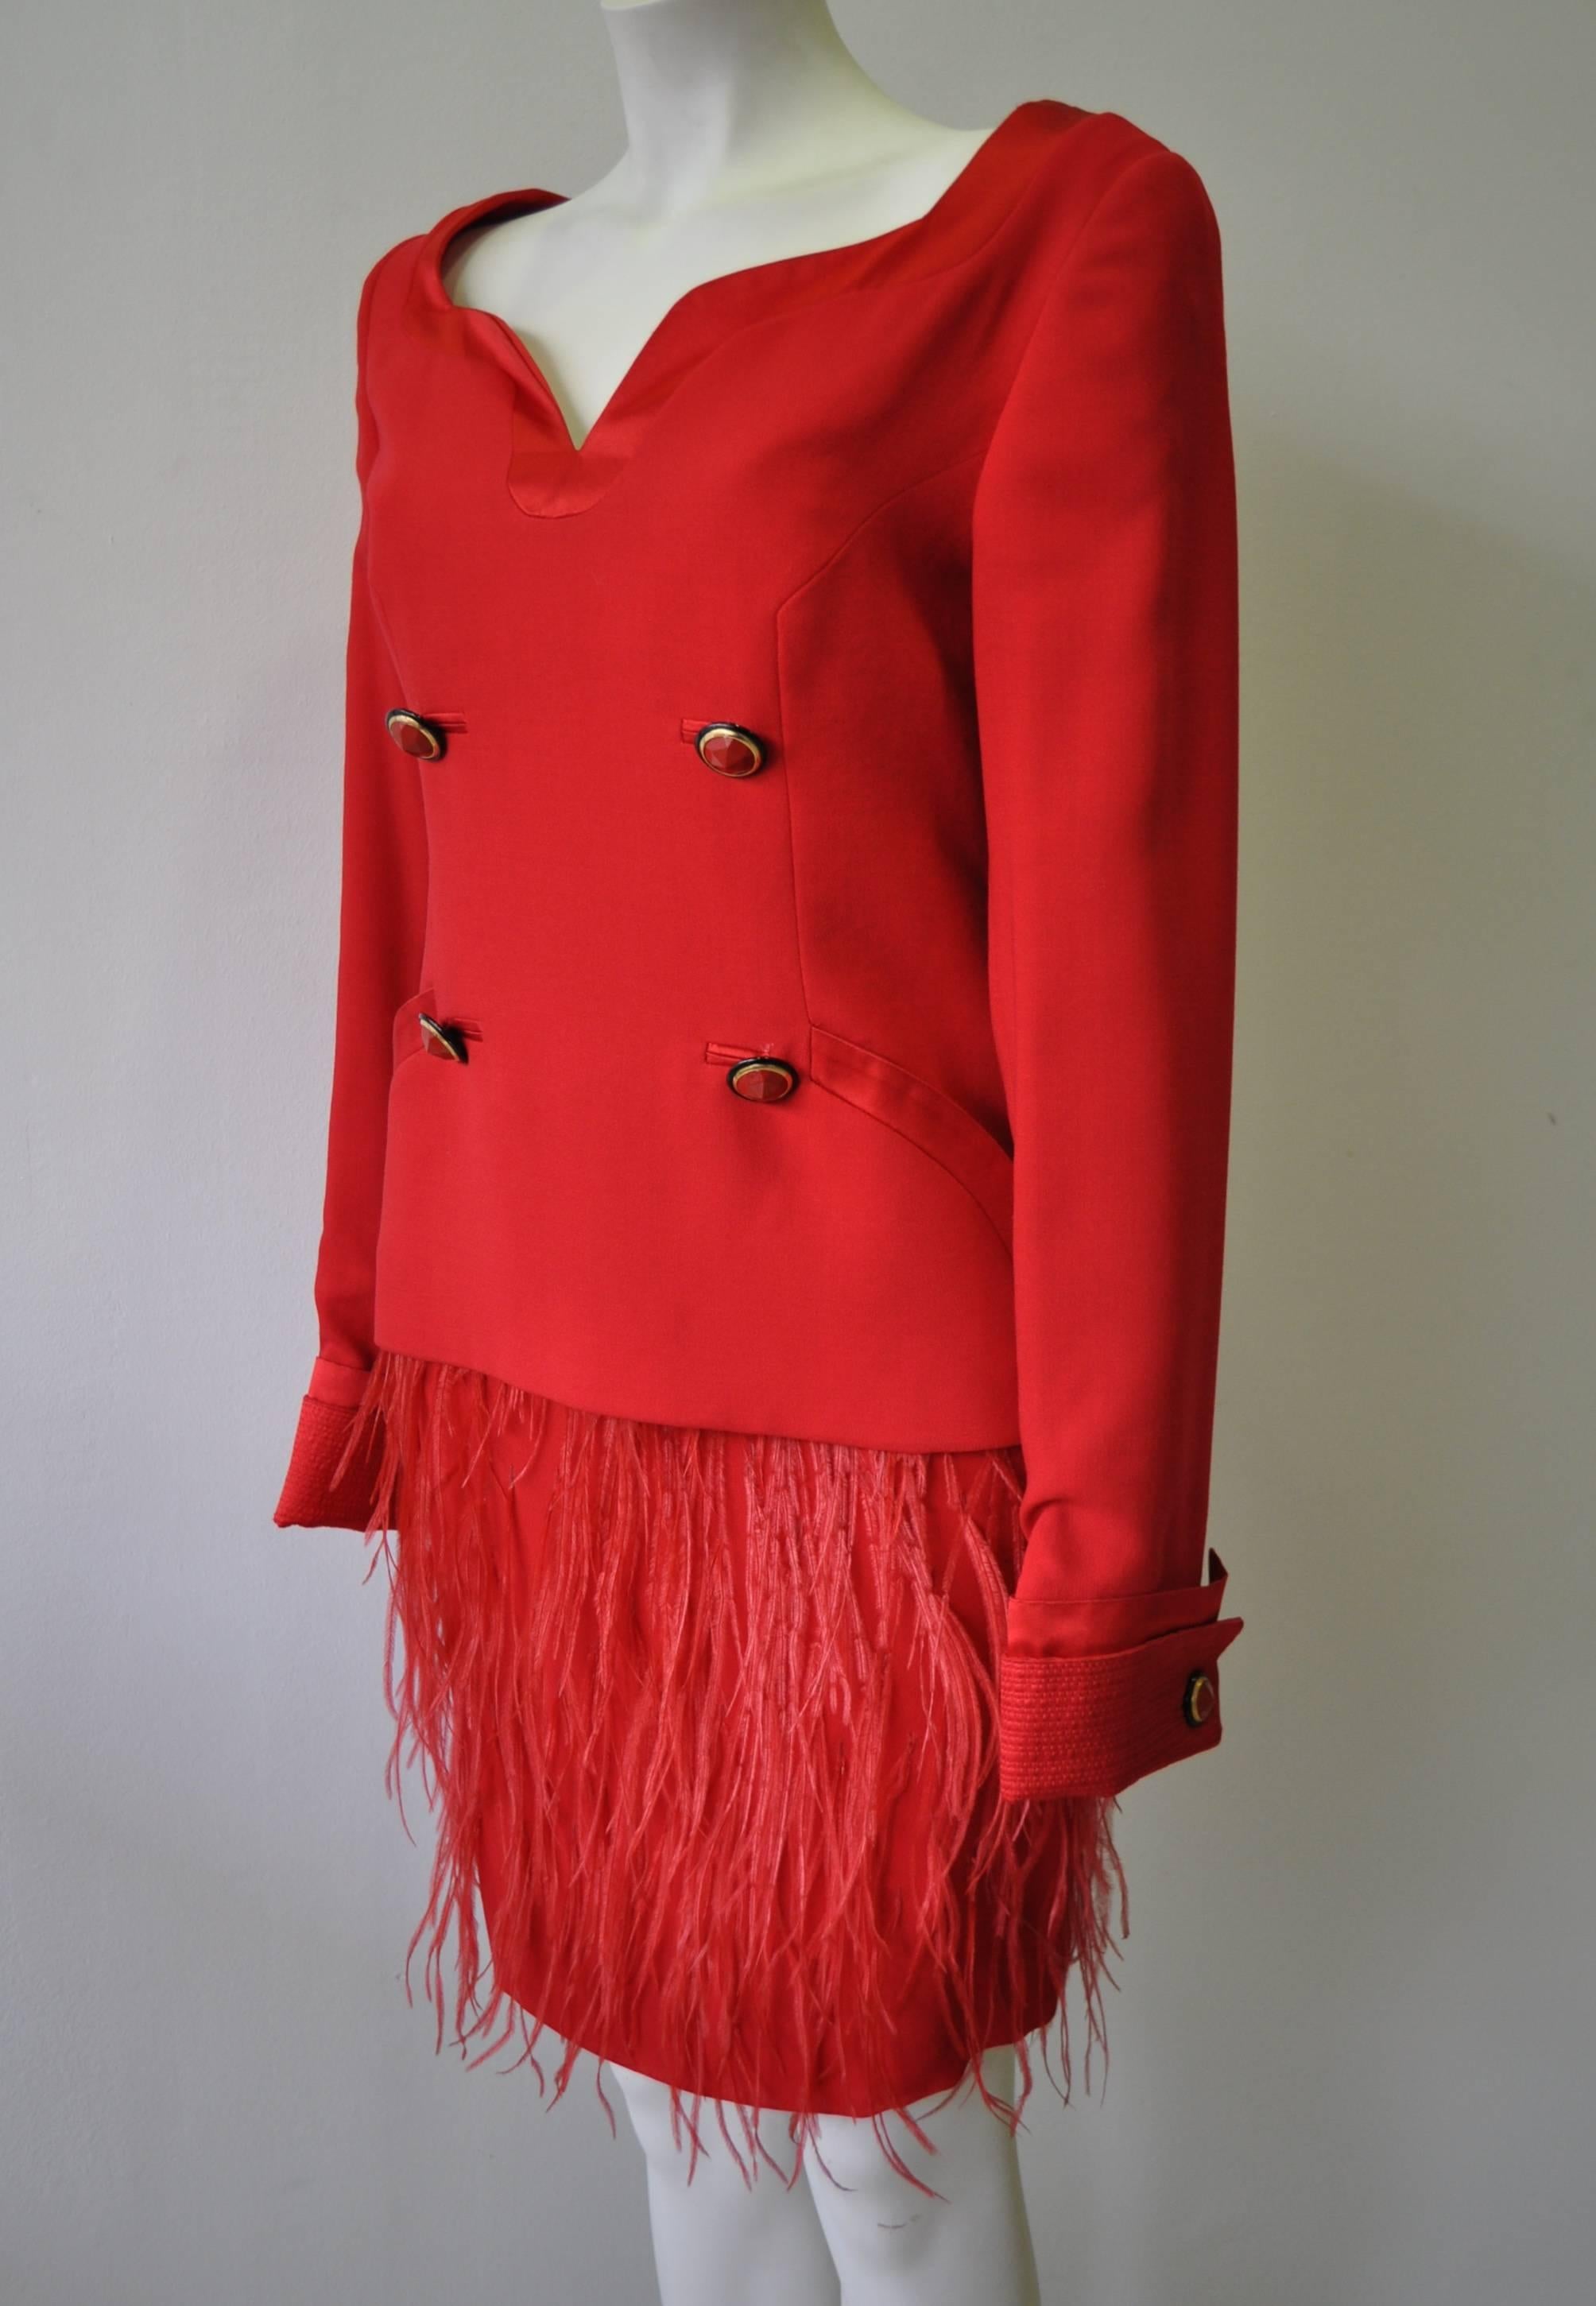 Red Exquisite Gianni Versace Couture Silk Crepe Cocktail Suit For Sale